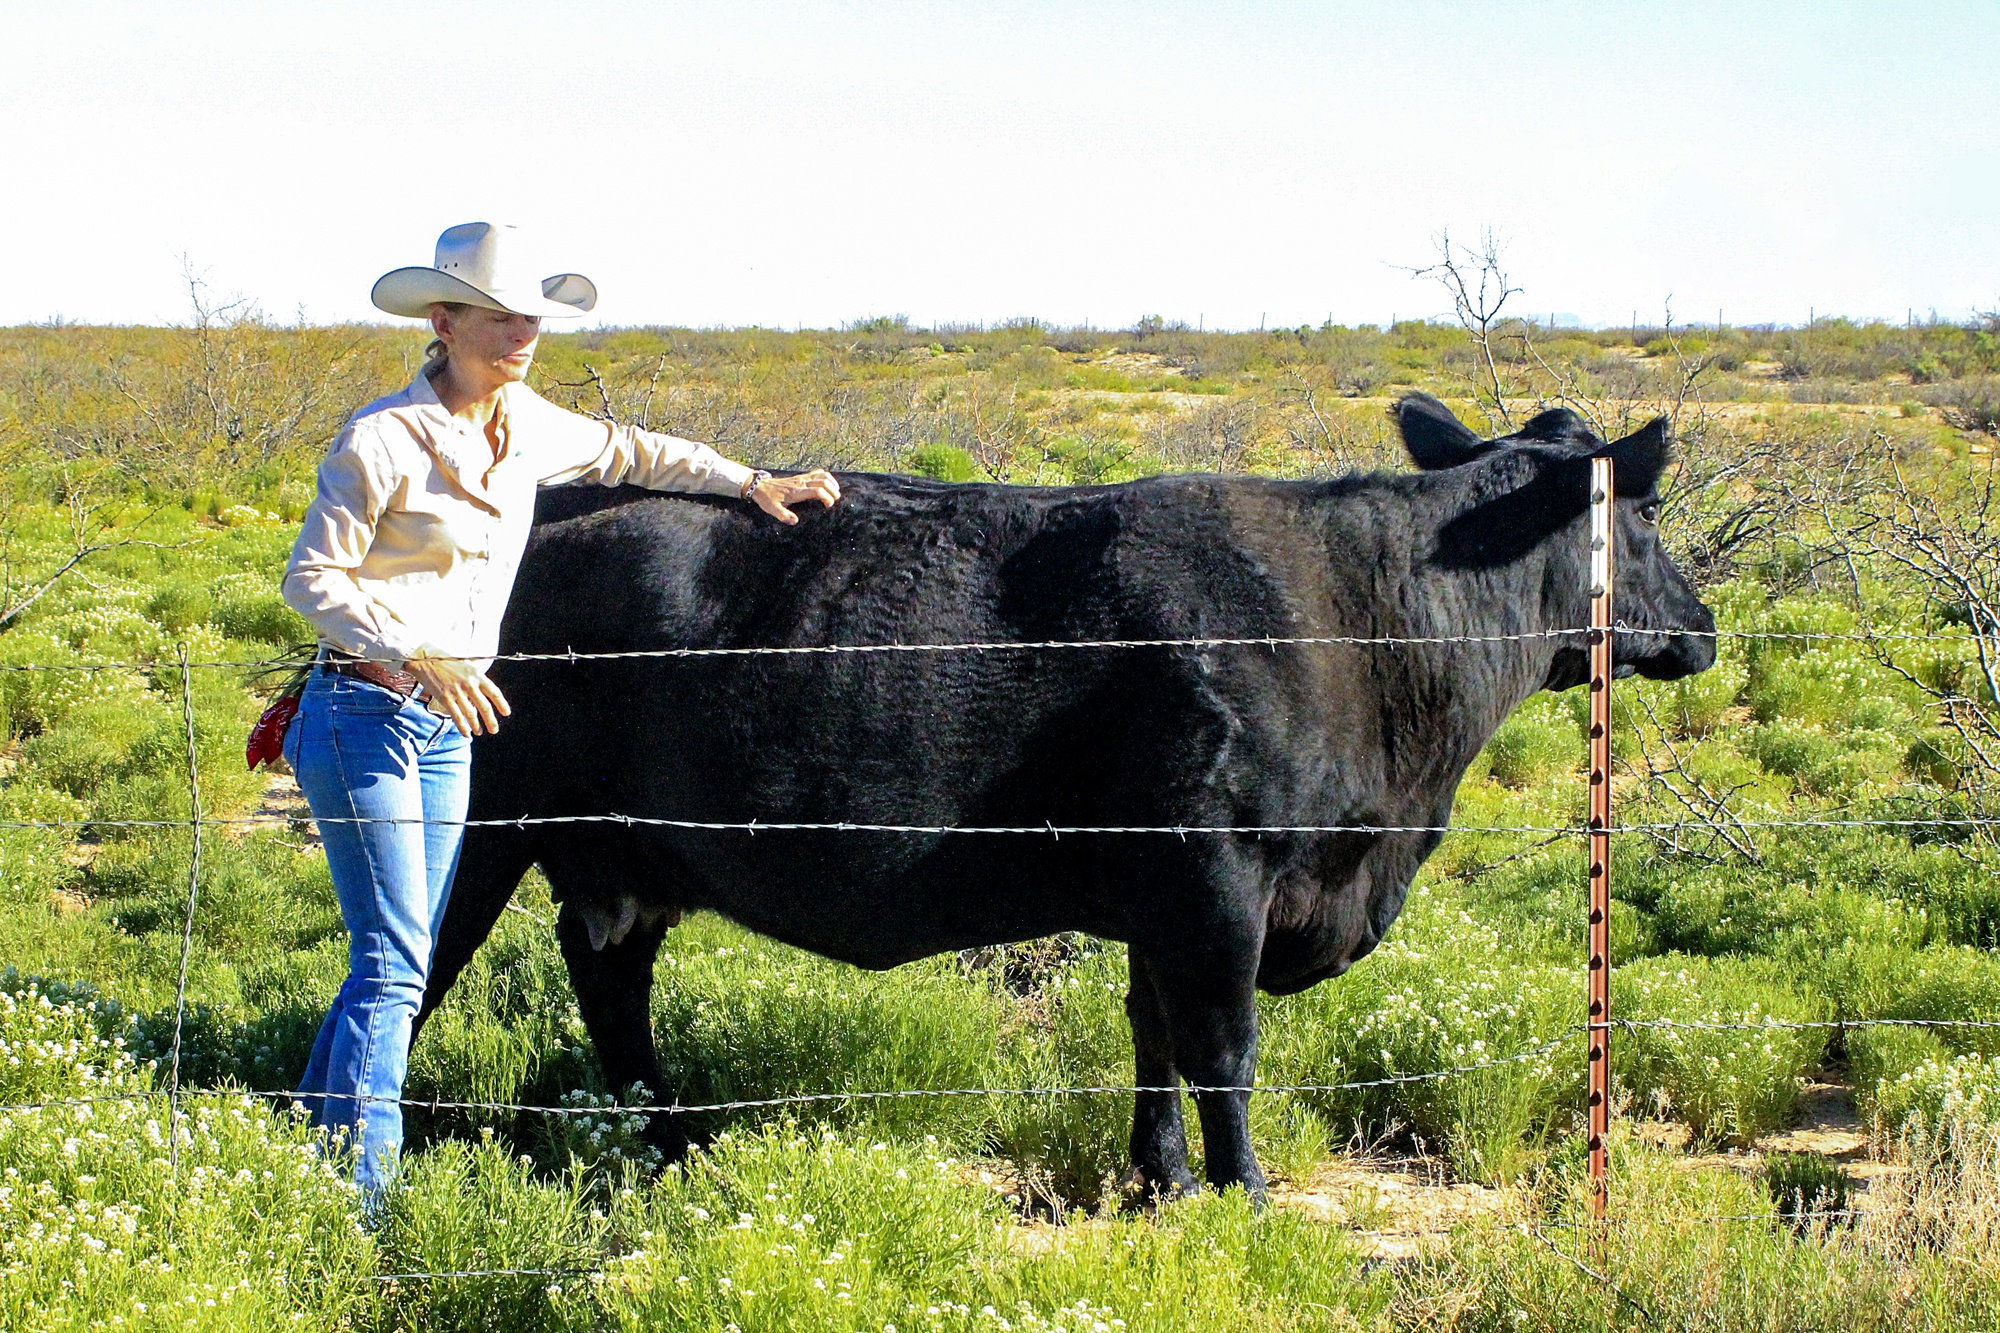 Sheri Spiegal portrait with black cow in a field. September 2021